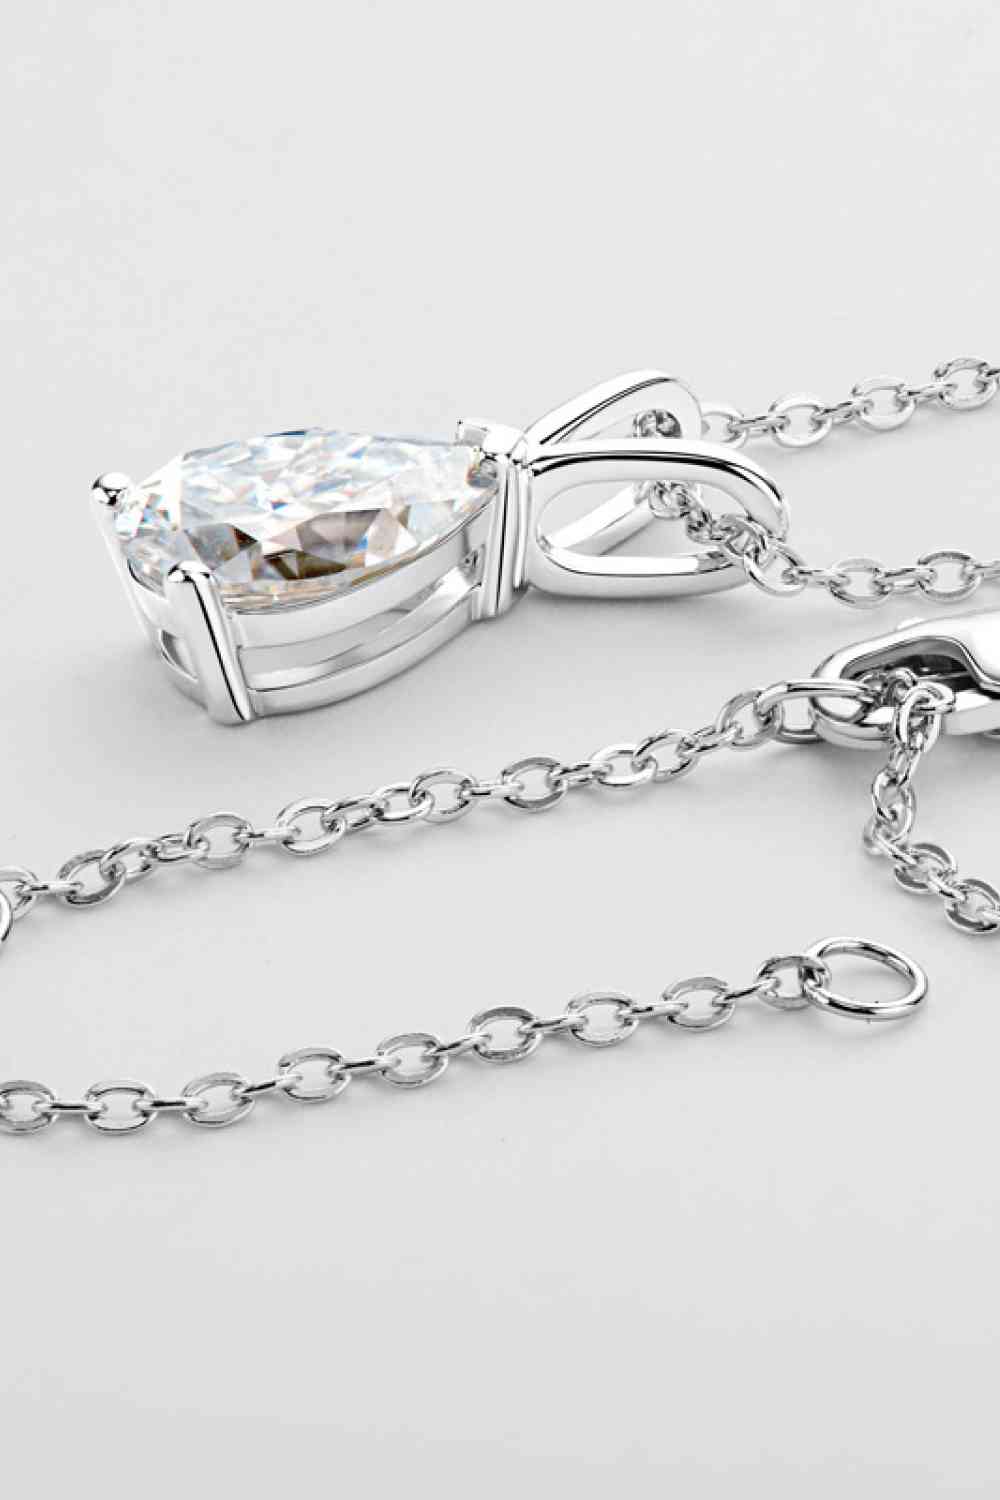 1.5 Carat Moissanite Pendant 925 Sterling Silver Necklace - lolaluxeshop